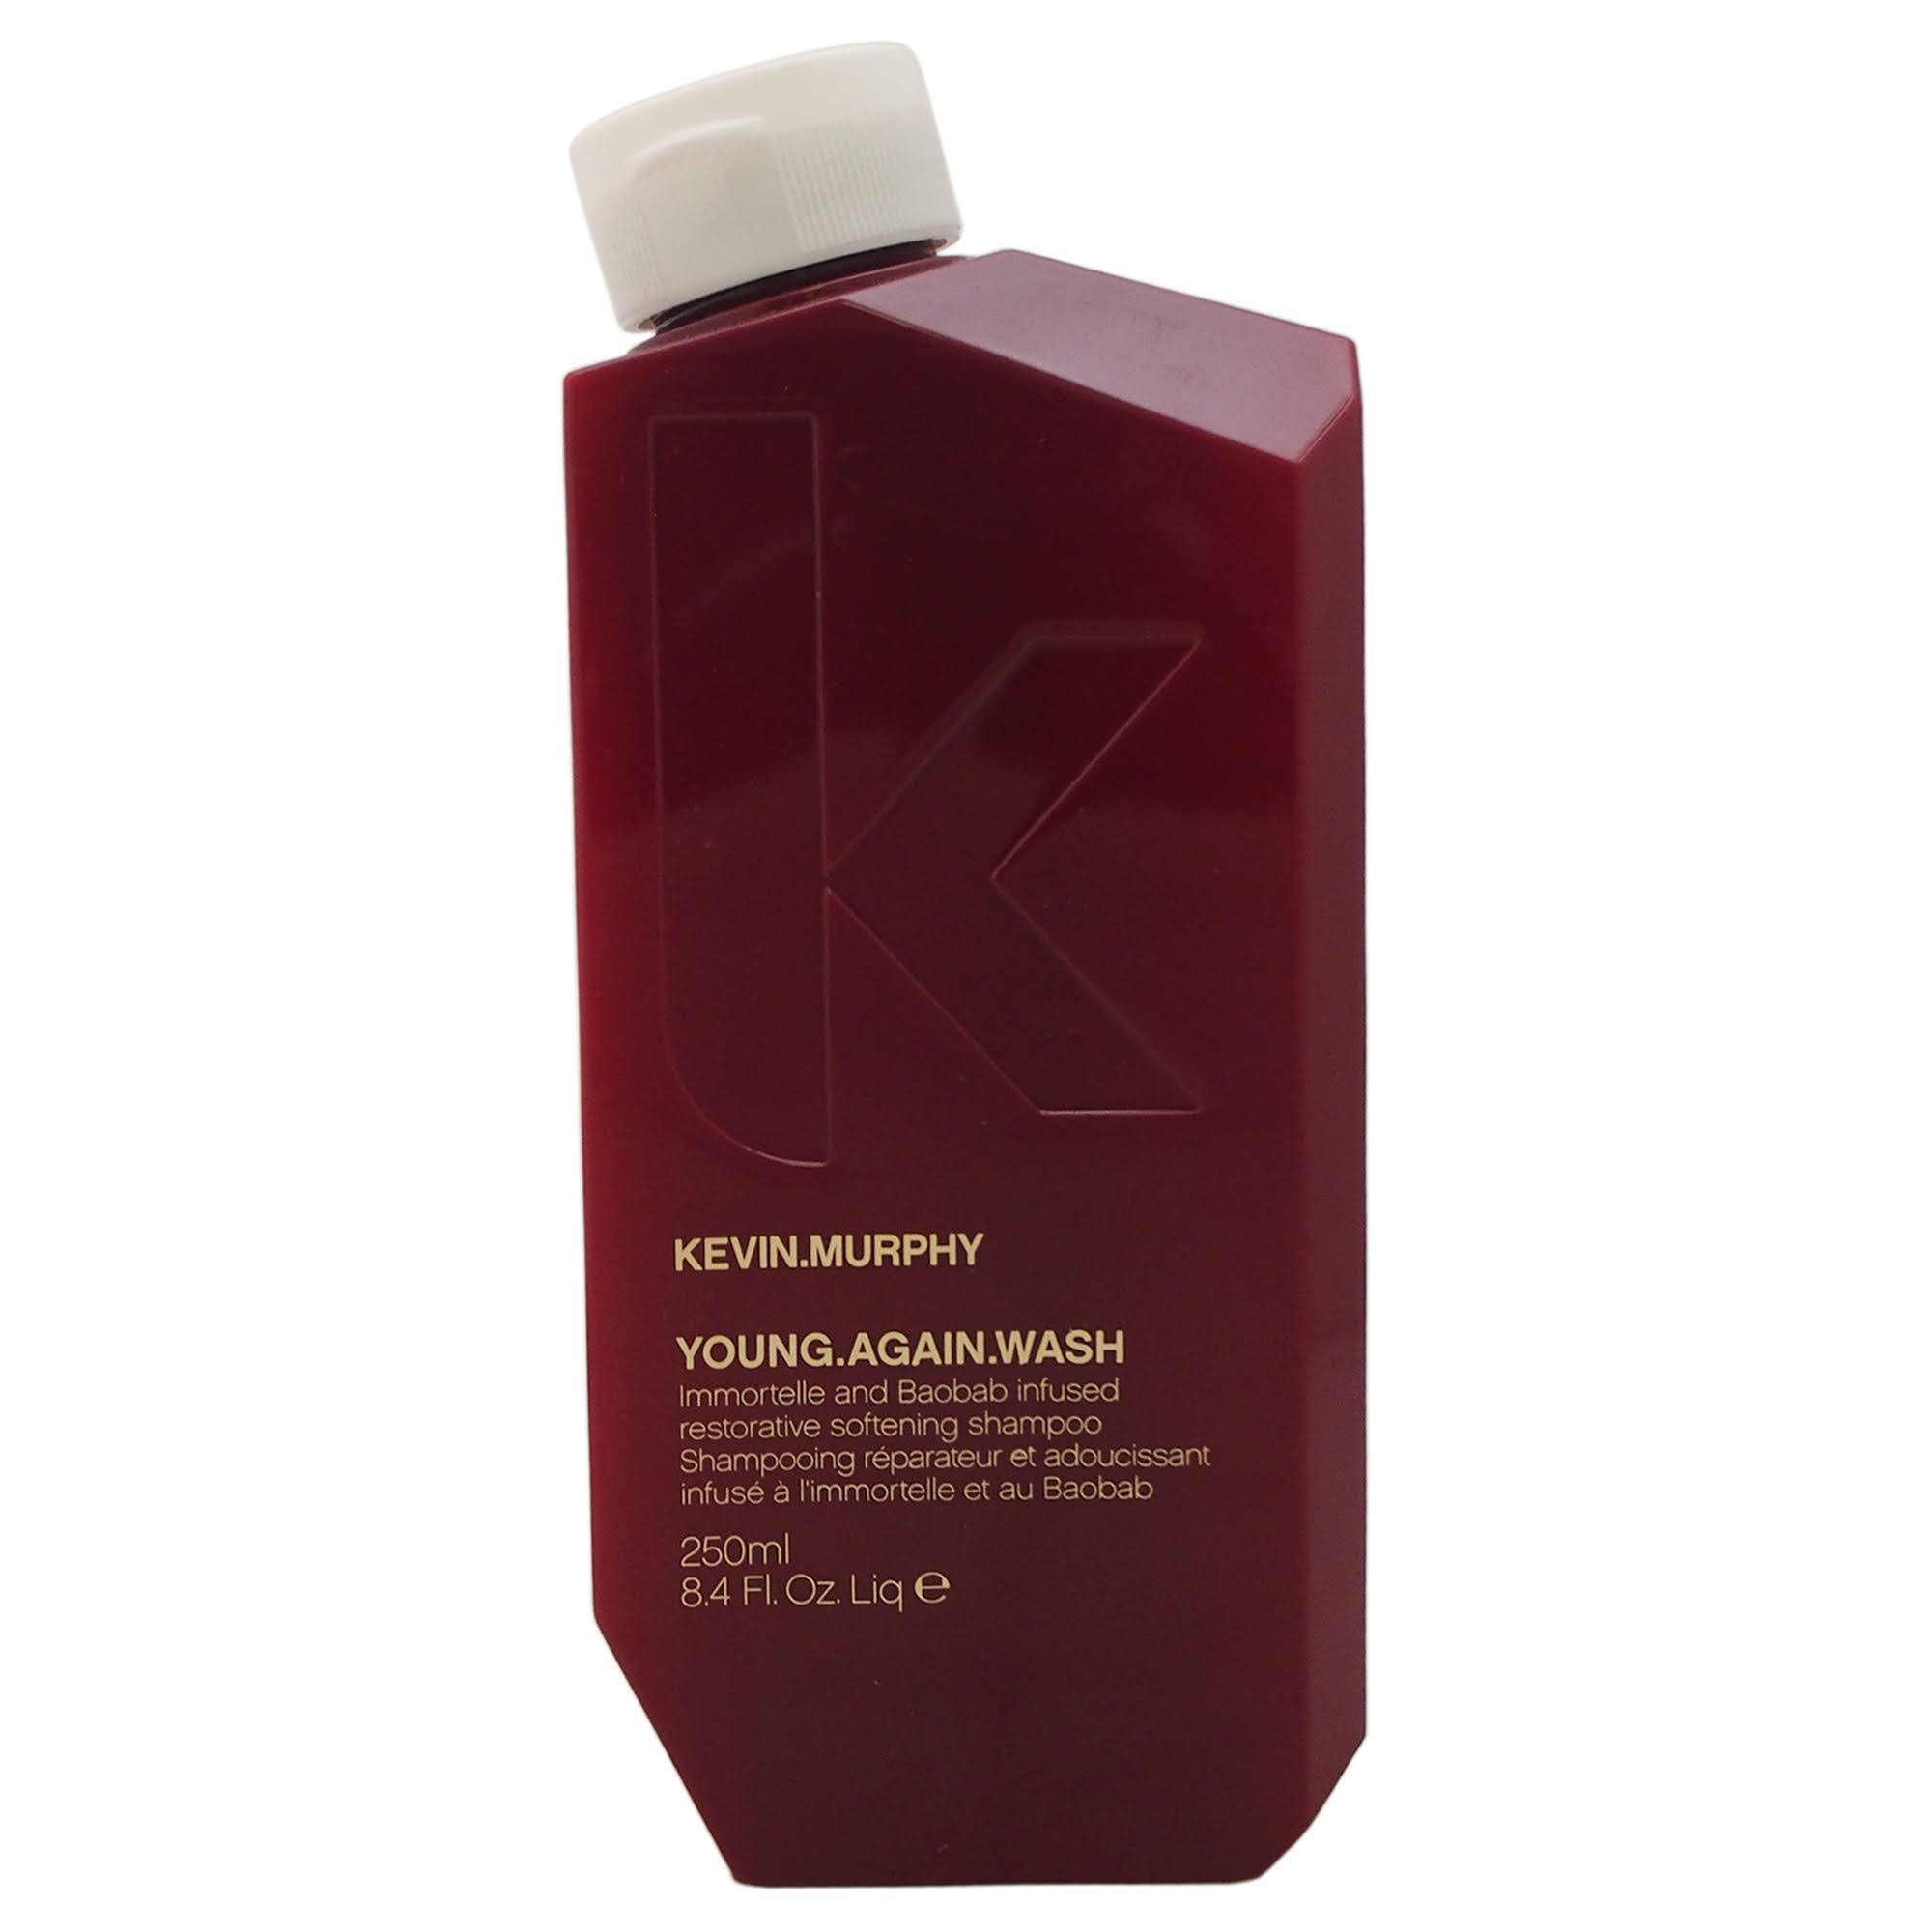 Kevin Murphy Young Again Wash Immortelle Shampoo - 250ml